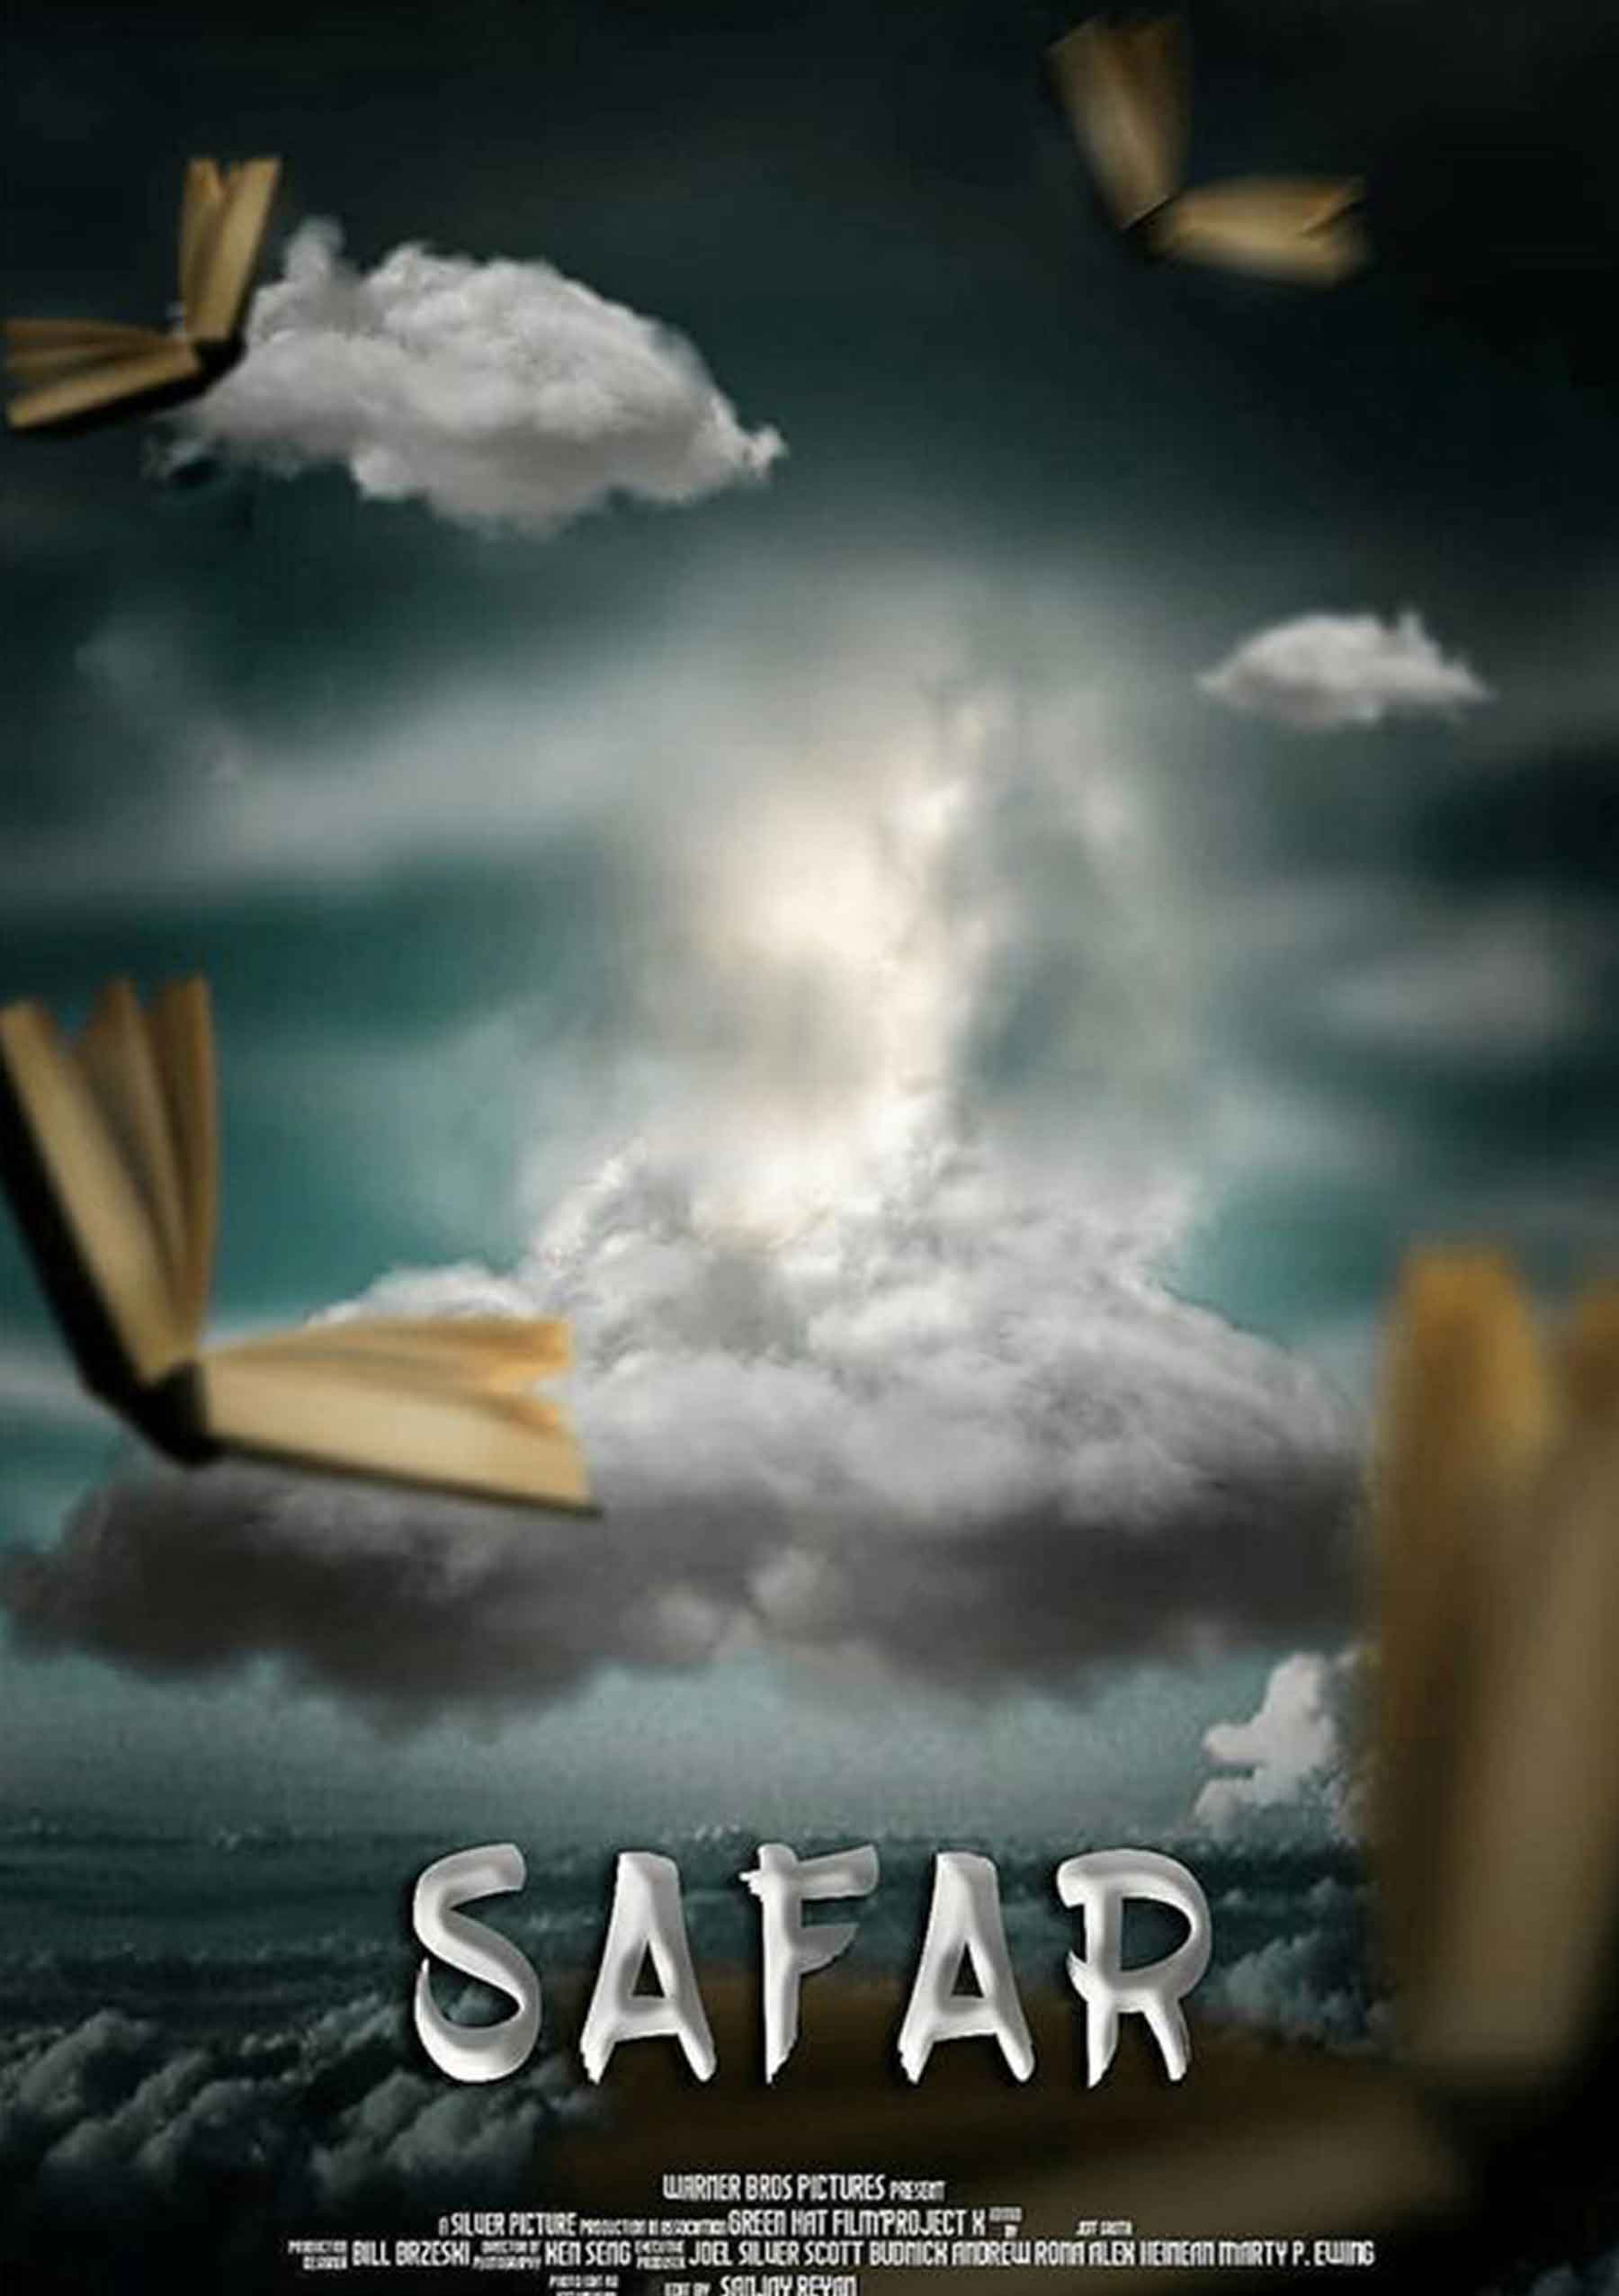 Safar New Movie Poster Background Free Stock [ Download ]